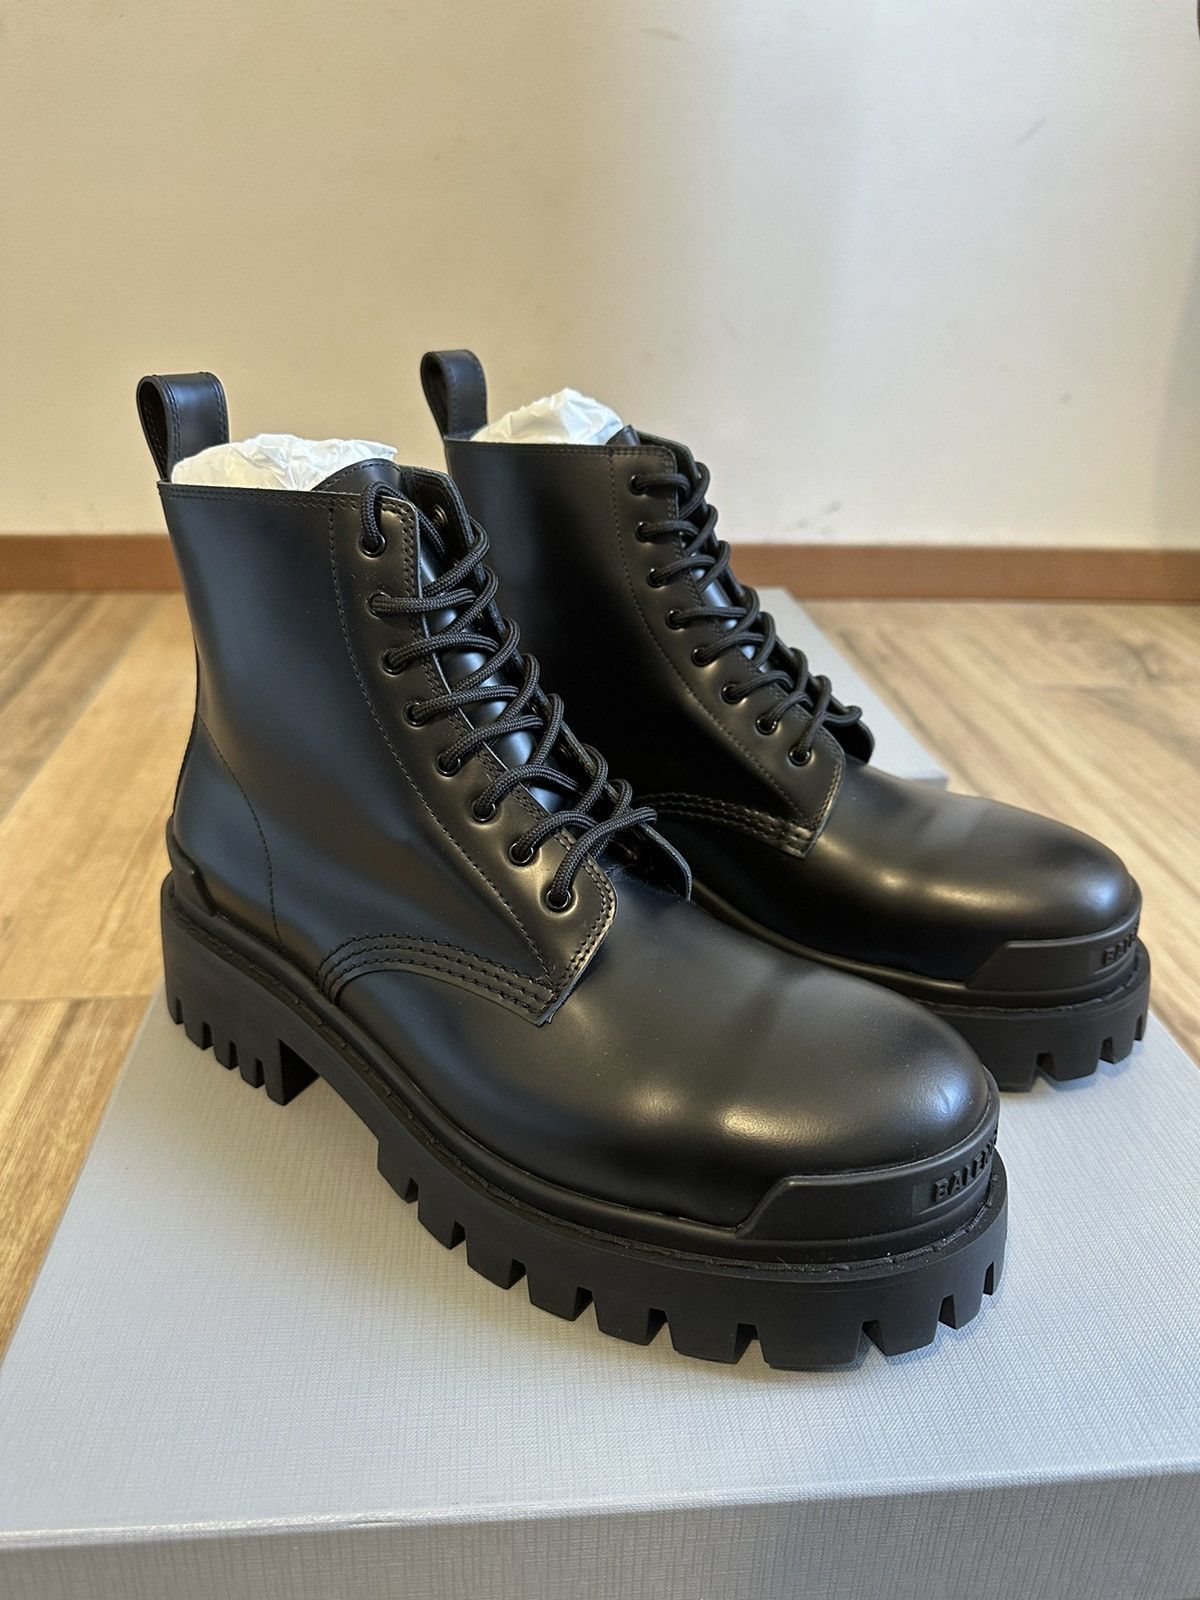 Balenciaga Kanye DSWT Distressed Canvas Strike Boots | Grailed